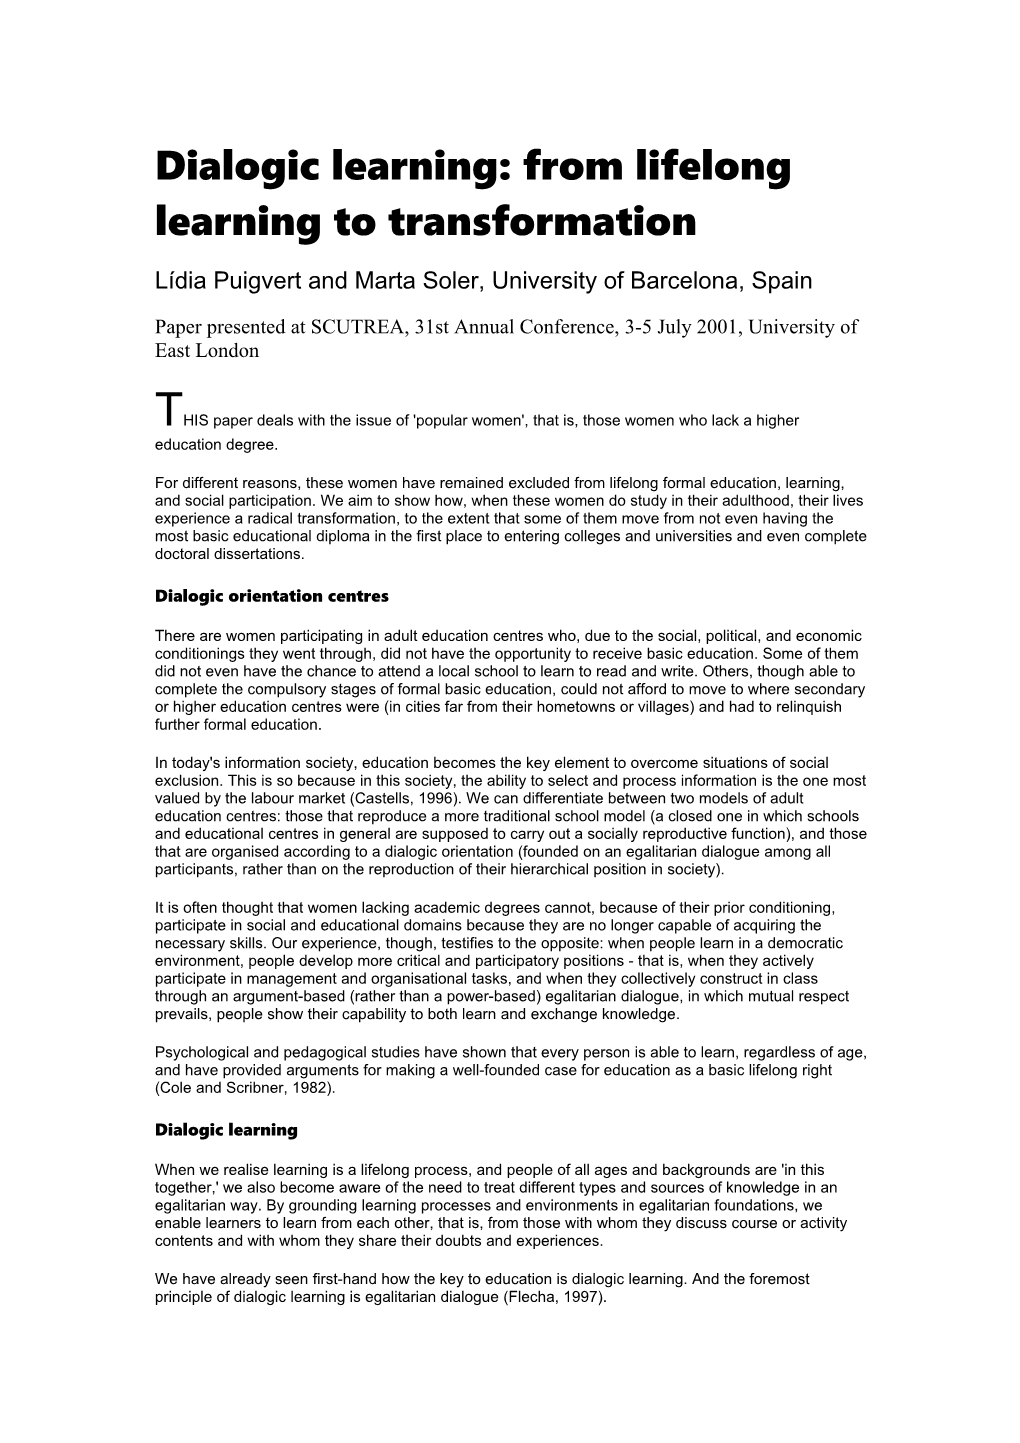 Dialogic Learning: from Lifelong Learning to Transformation